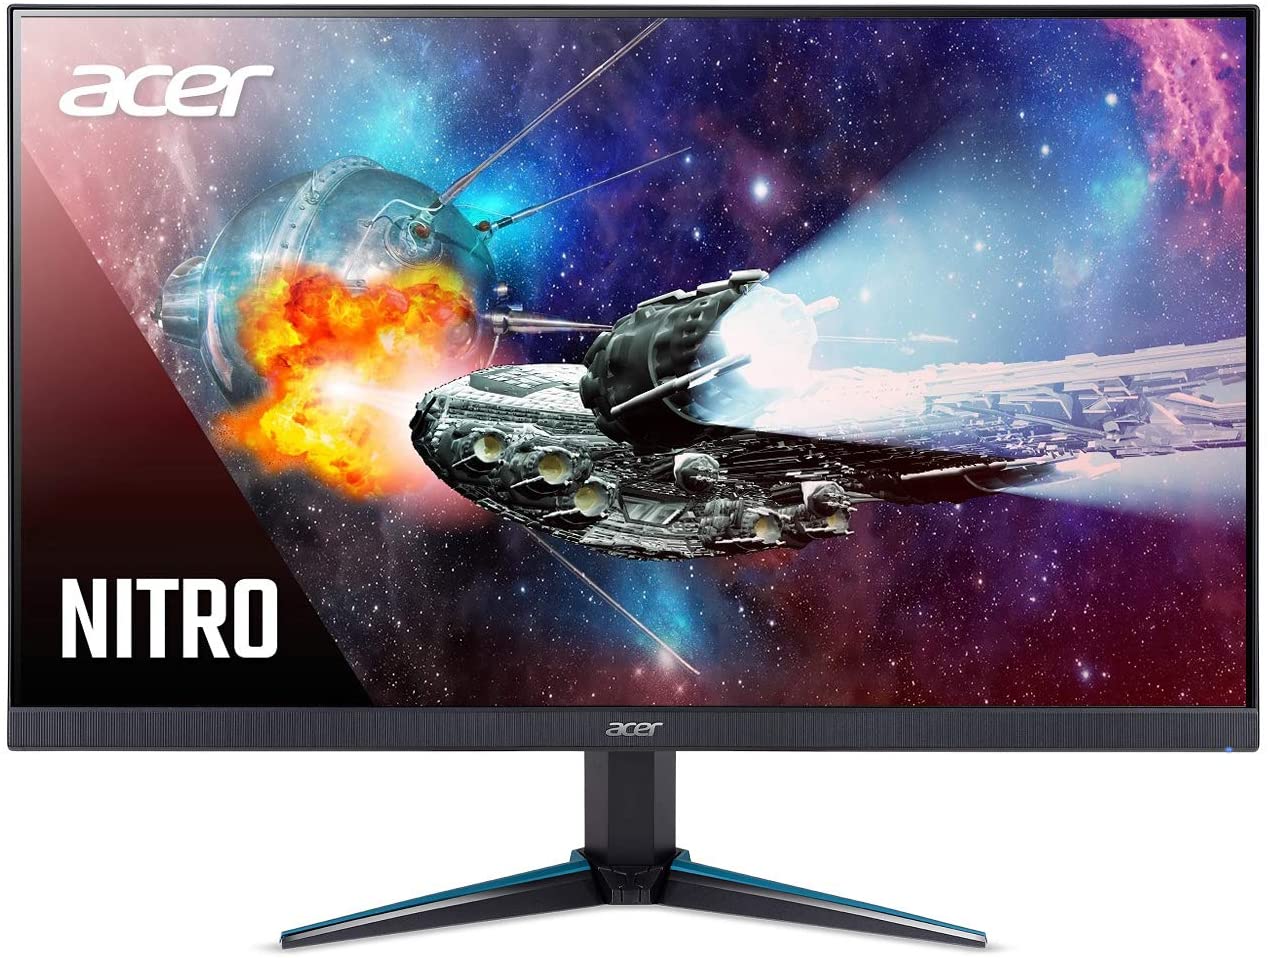 Acer - best monitor for GTX 1080 Ti